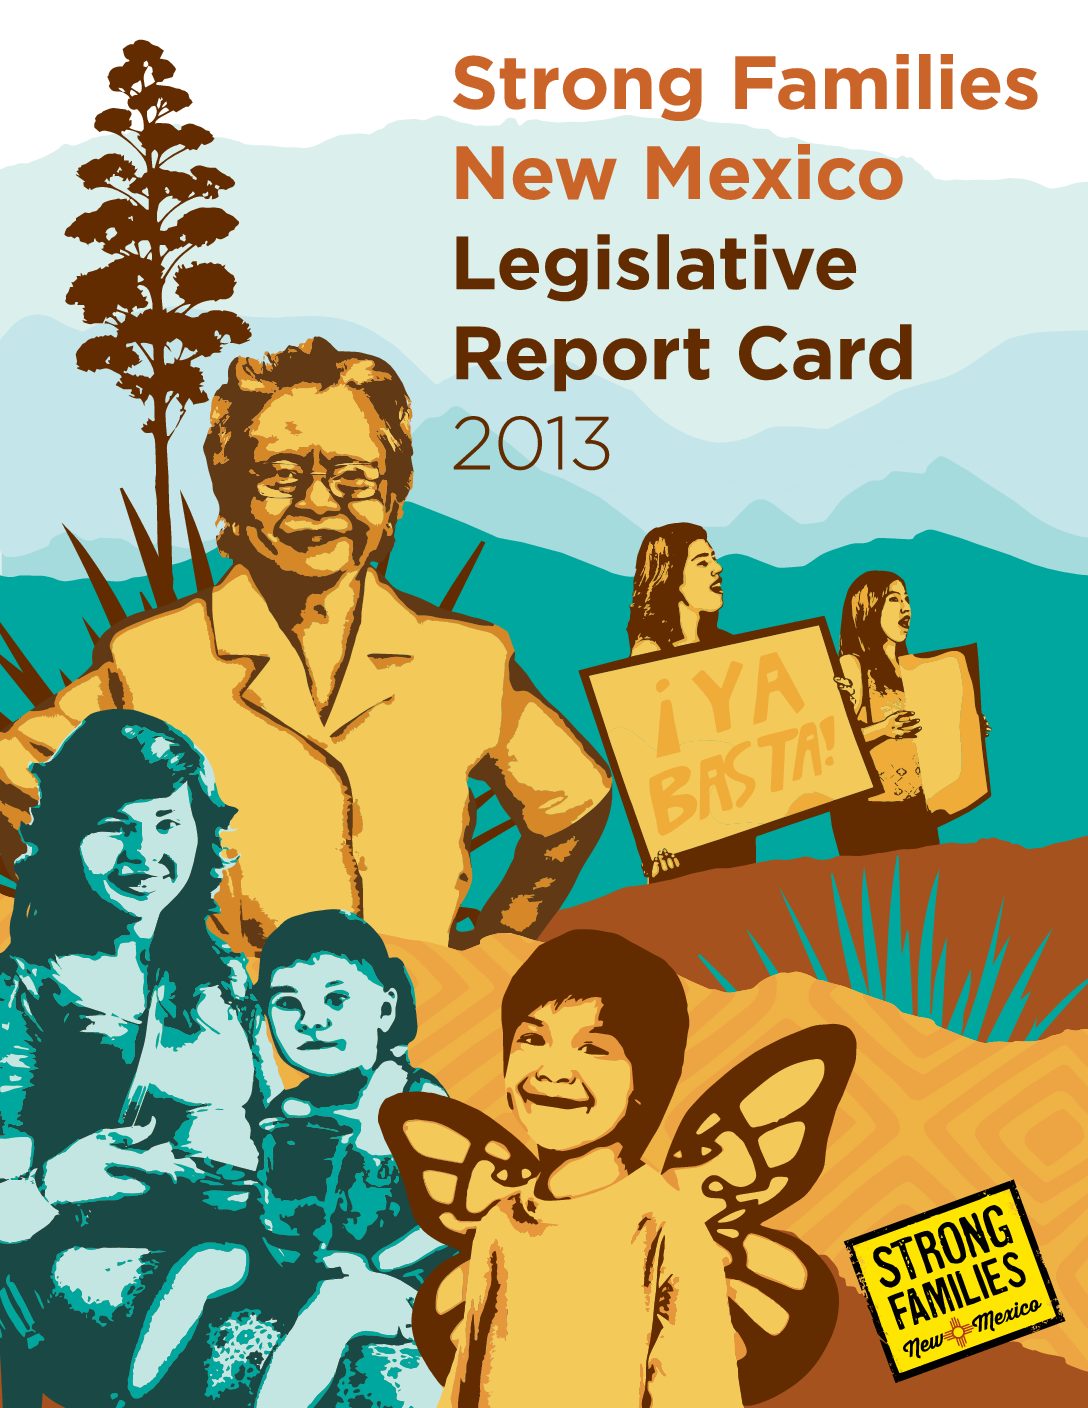 Strong Families New Mexico Legislative Report Card